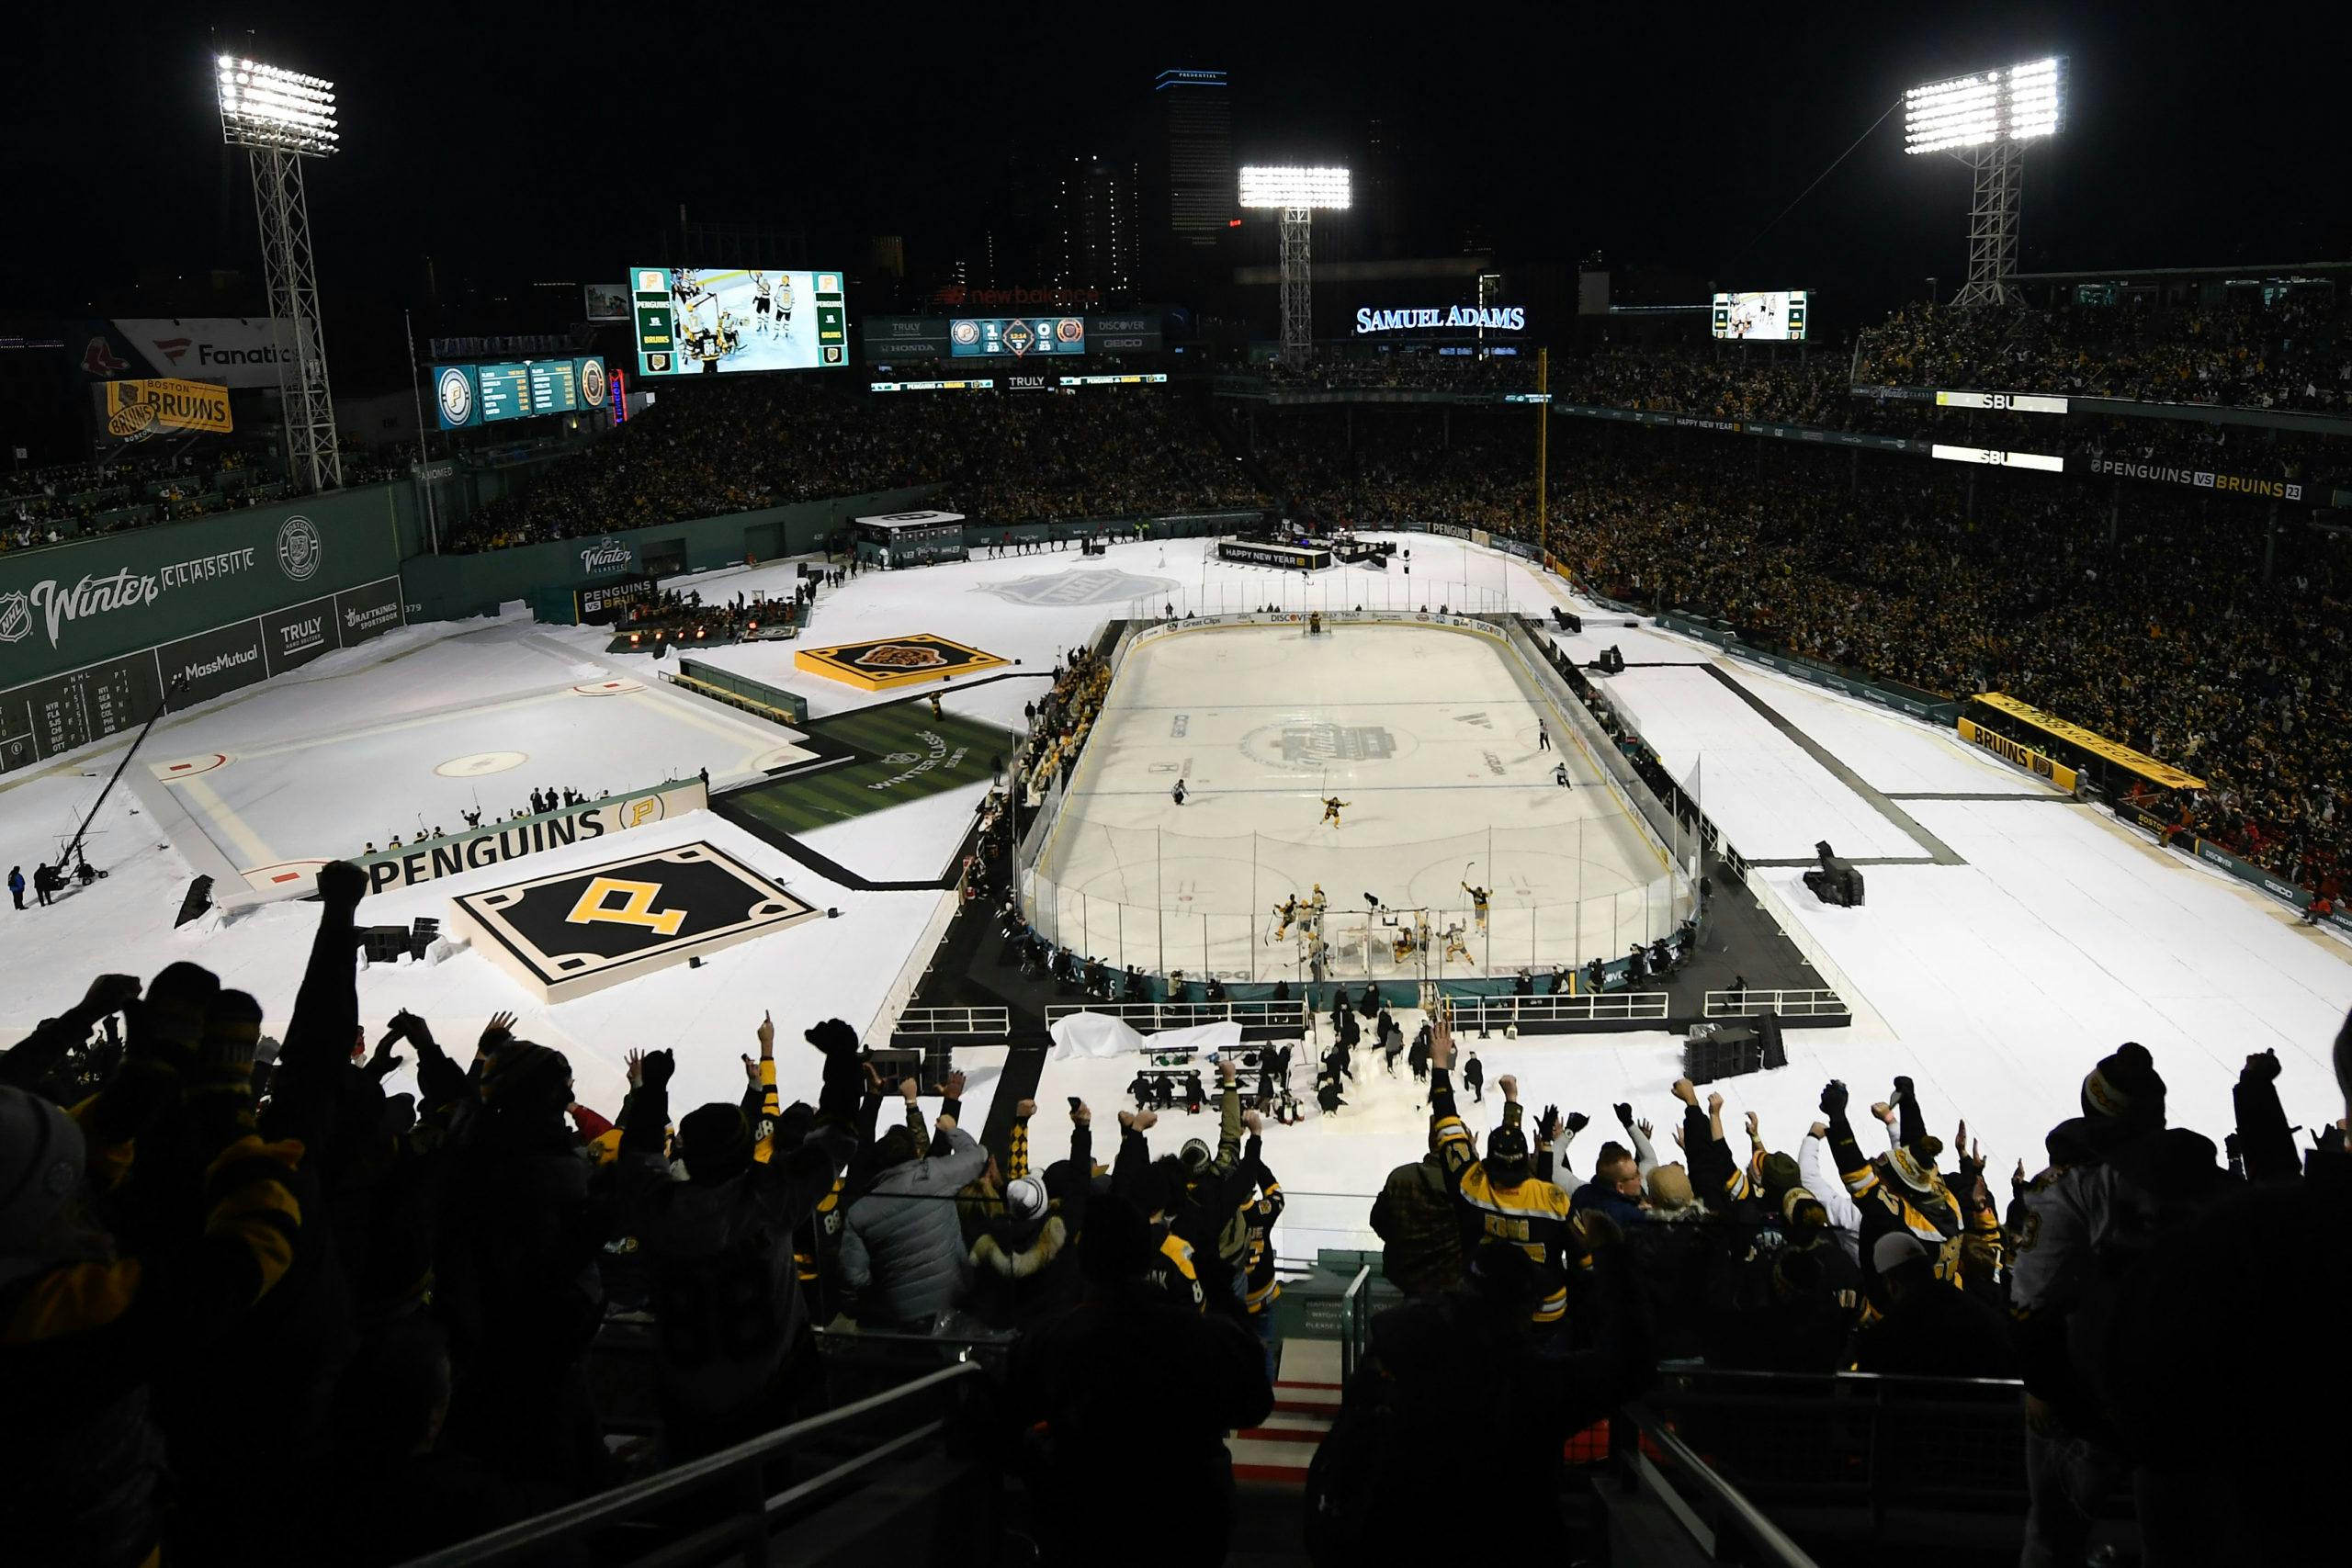 Winter Classic, Stadium Series and Heritage Classic jerseys, ranked